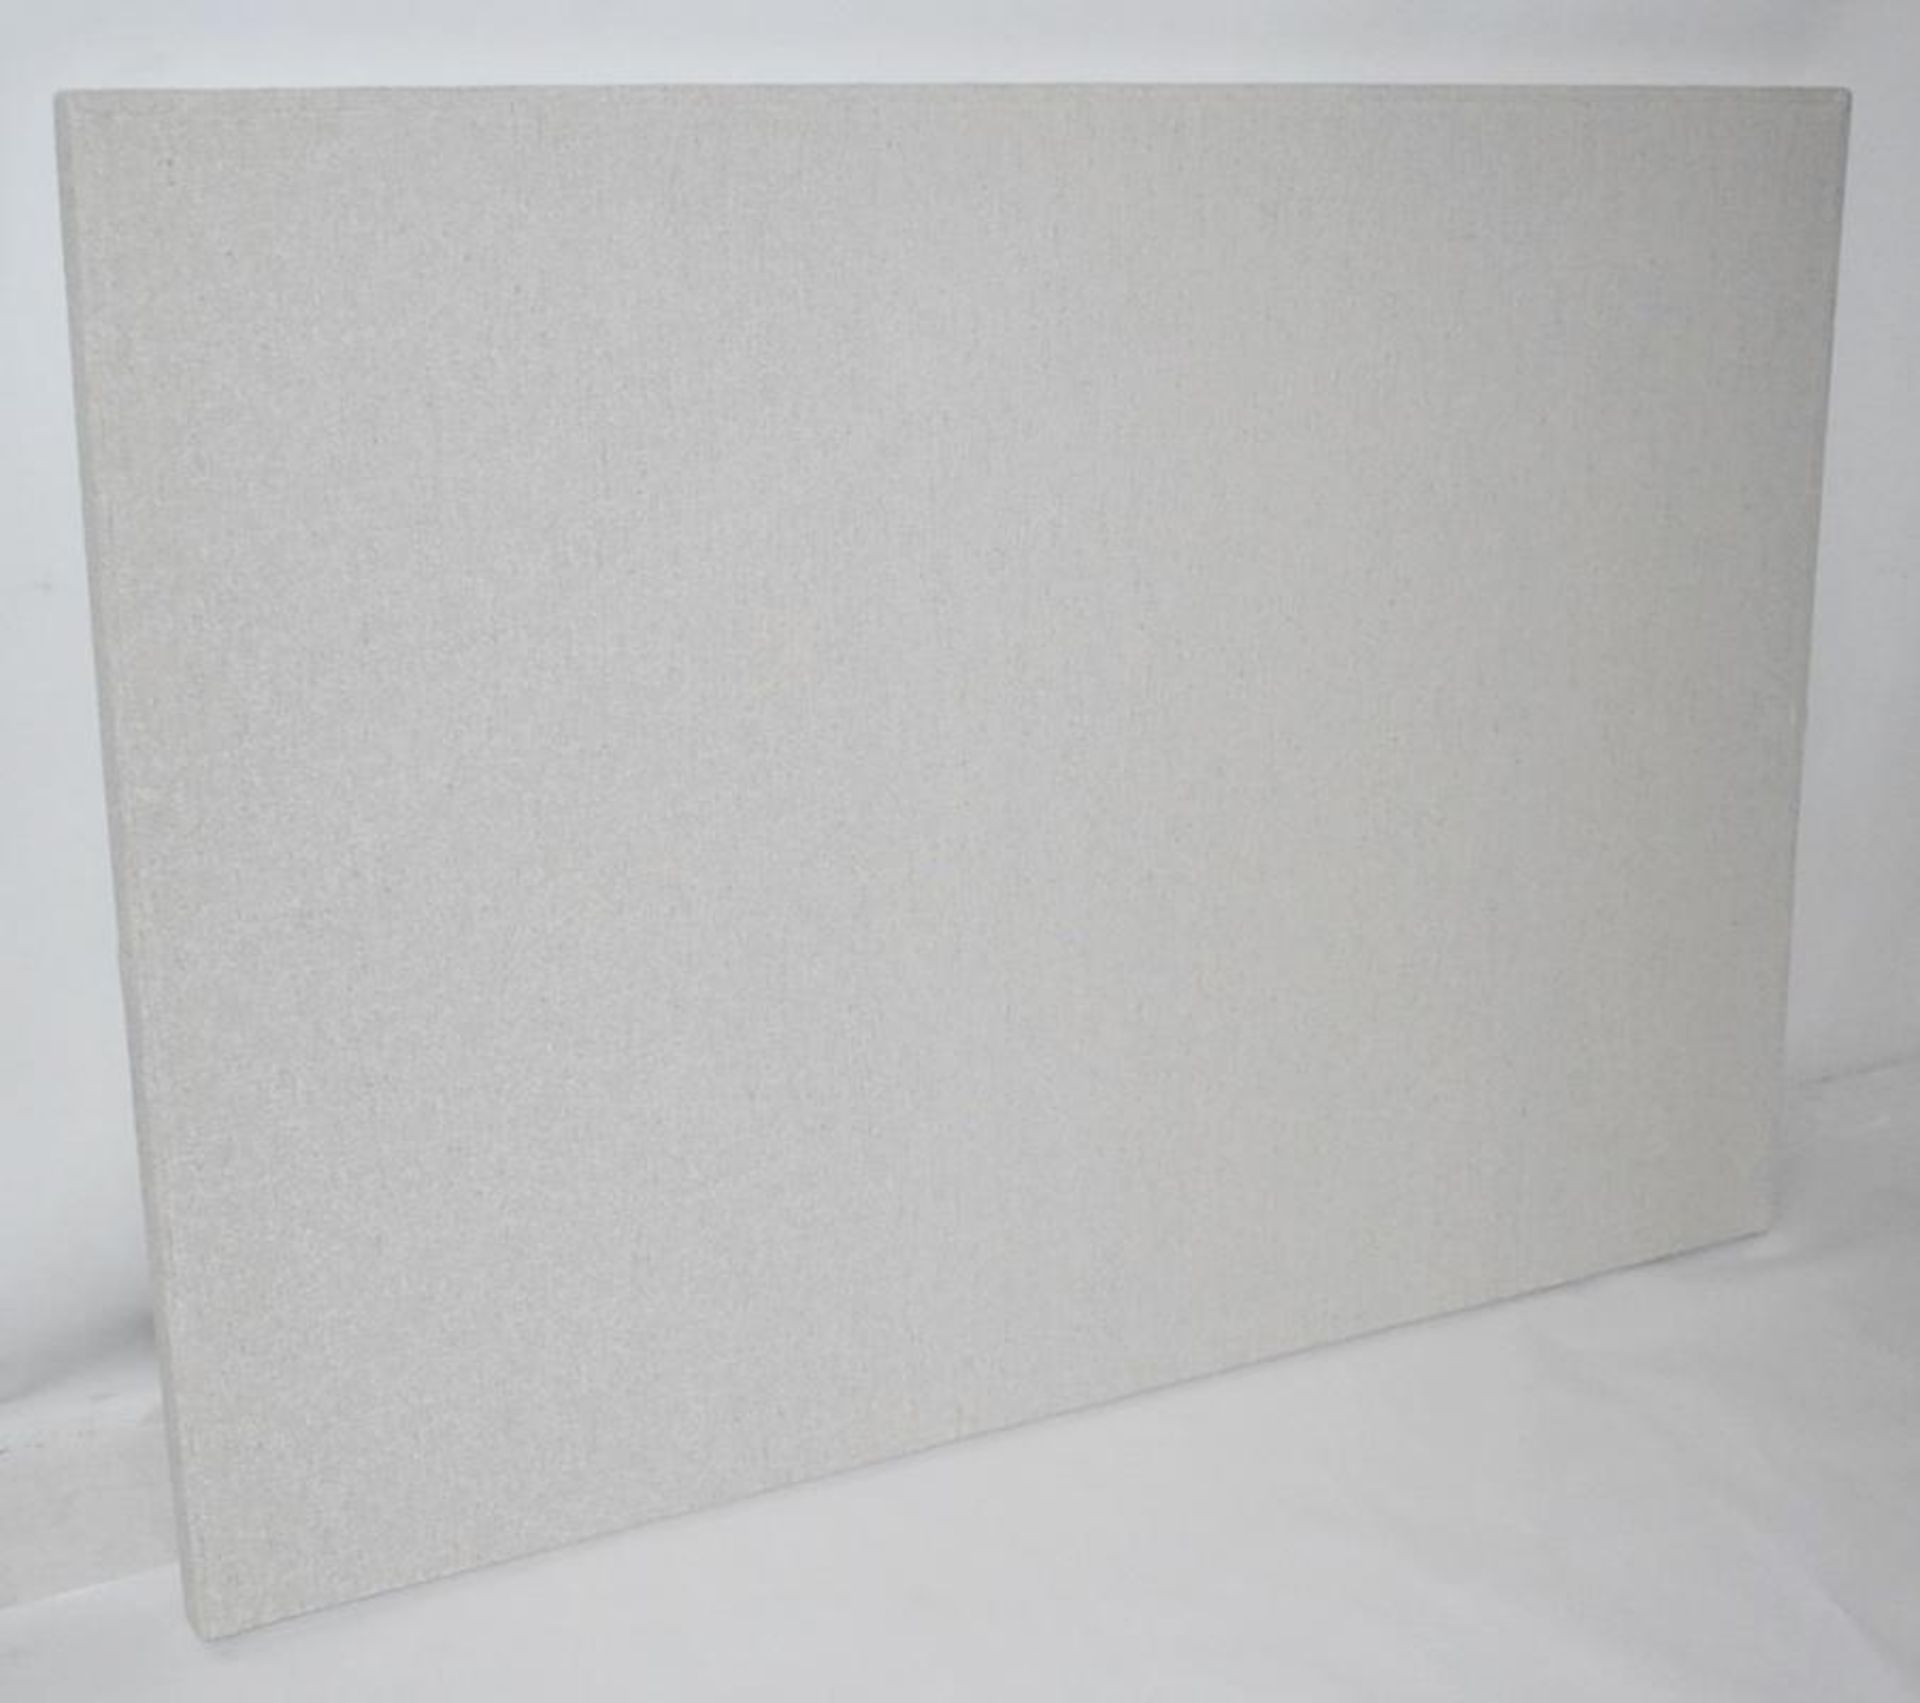 1 x VISPRING 'Muses' Luxury Upholstered Kingsize Headboard In A Pale Neutral Tone - Dimensions: W150 - Image 4 of 5